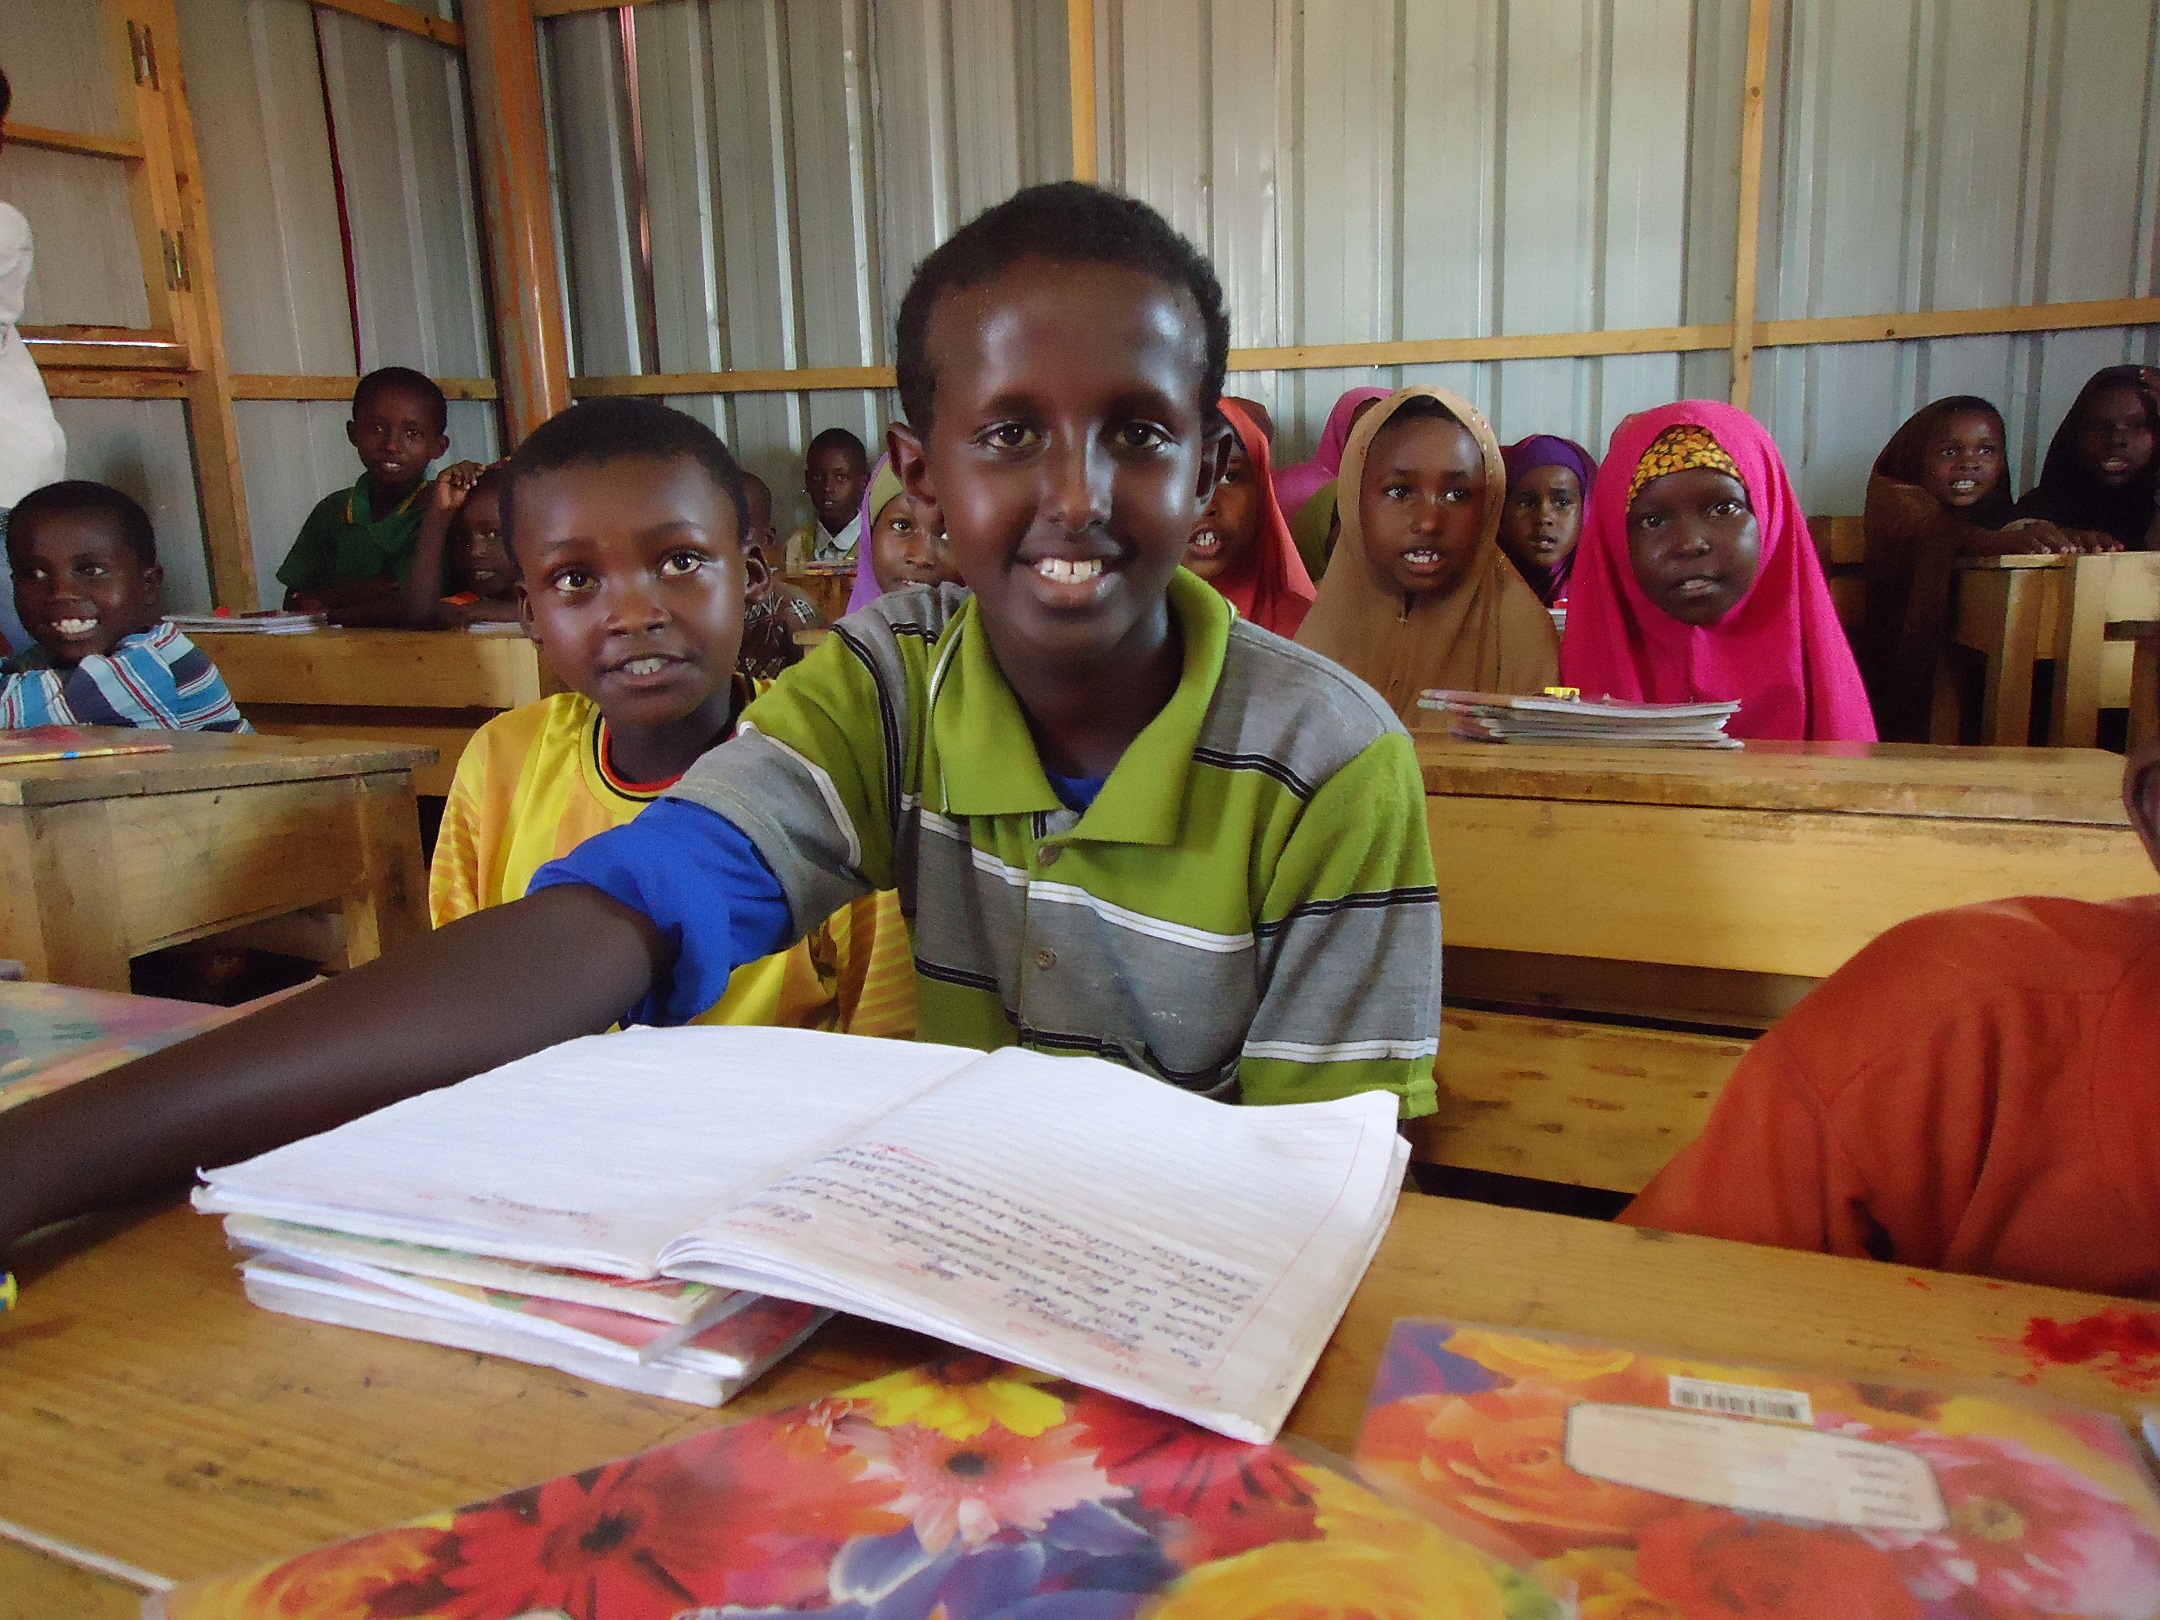 Students in Somalia in a classroom.